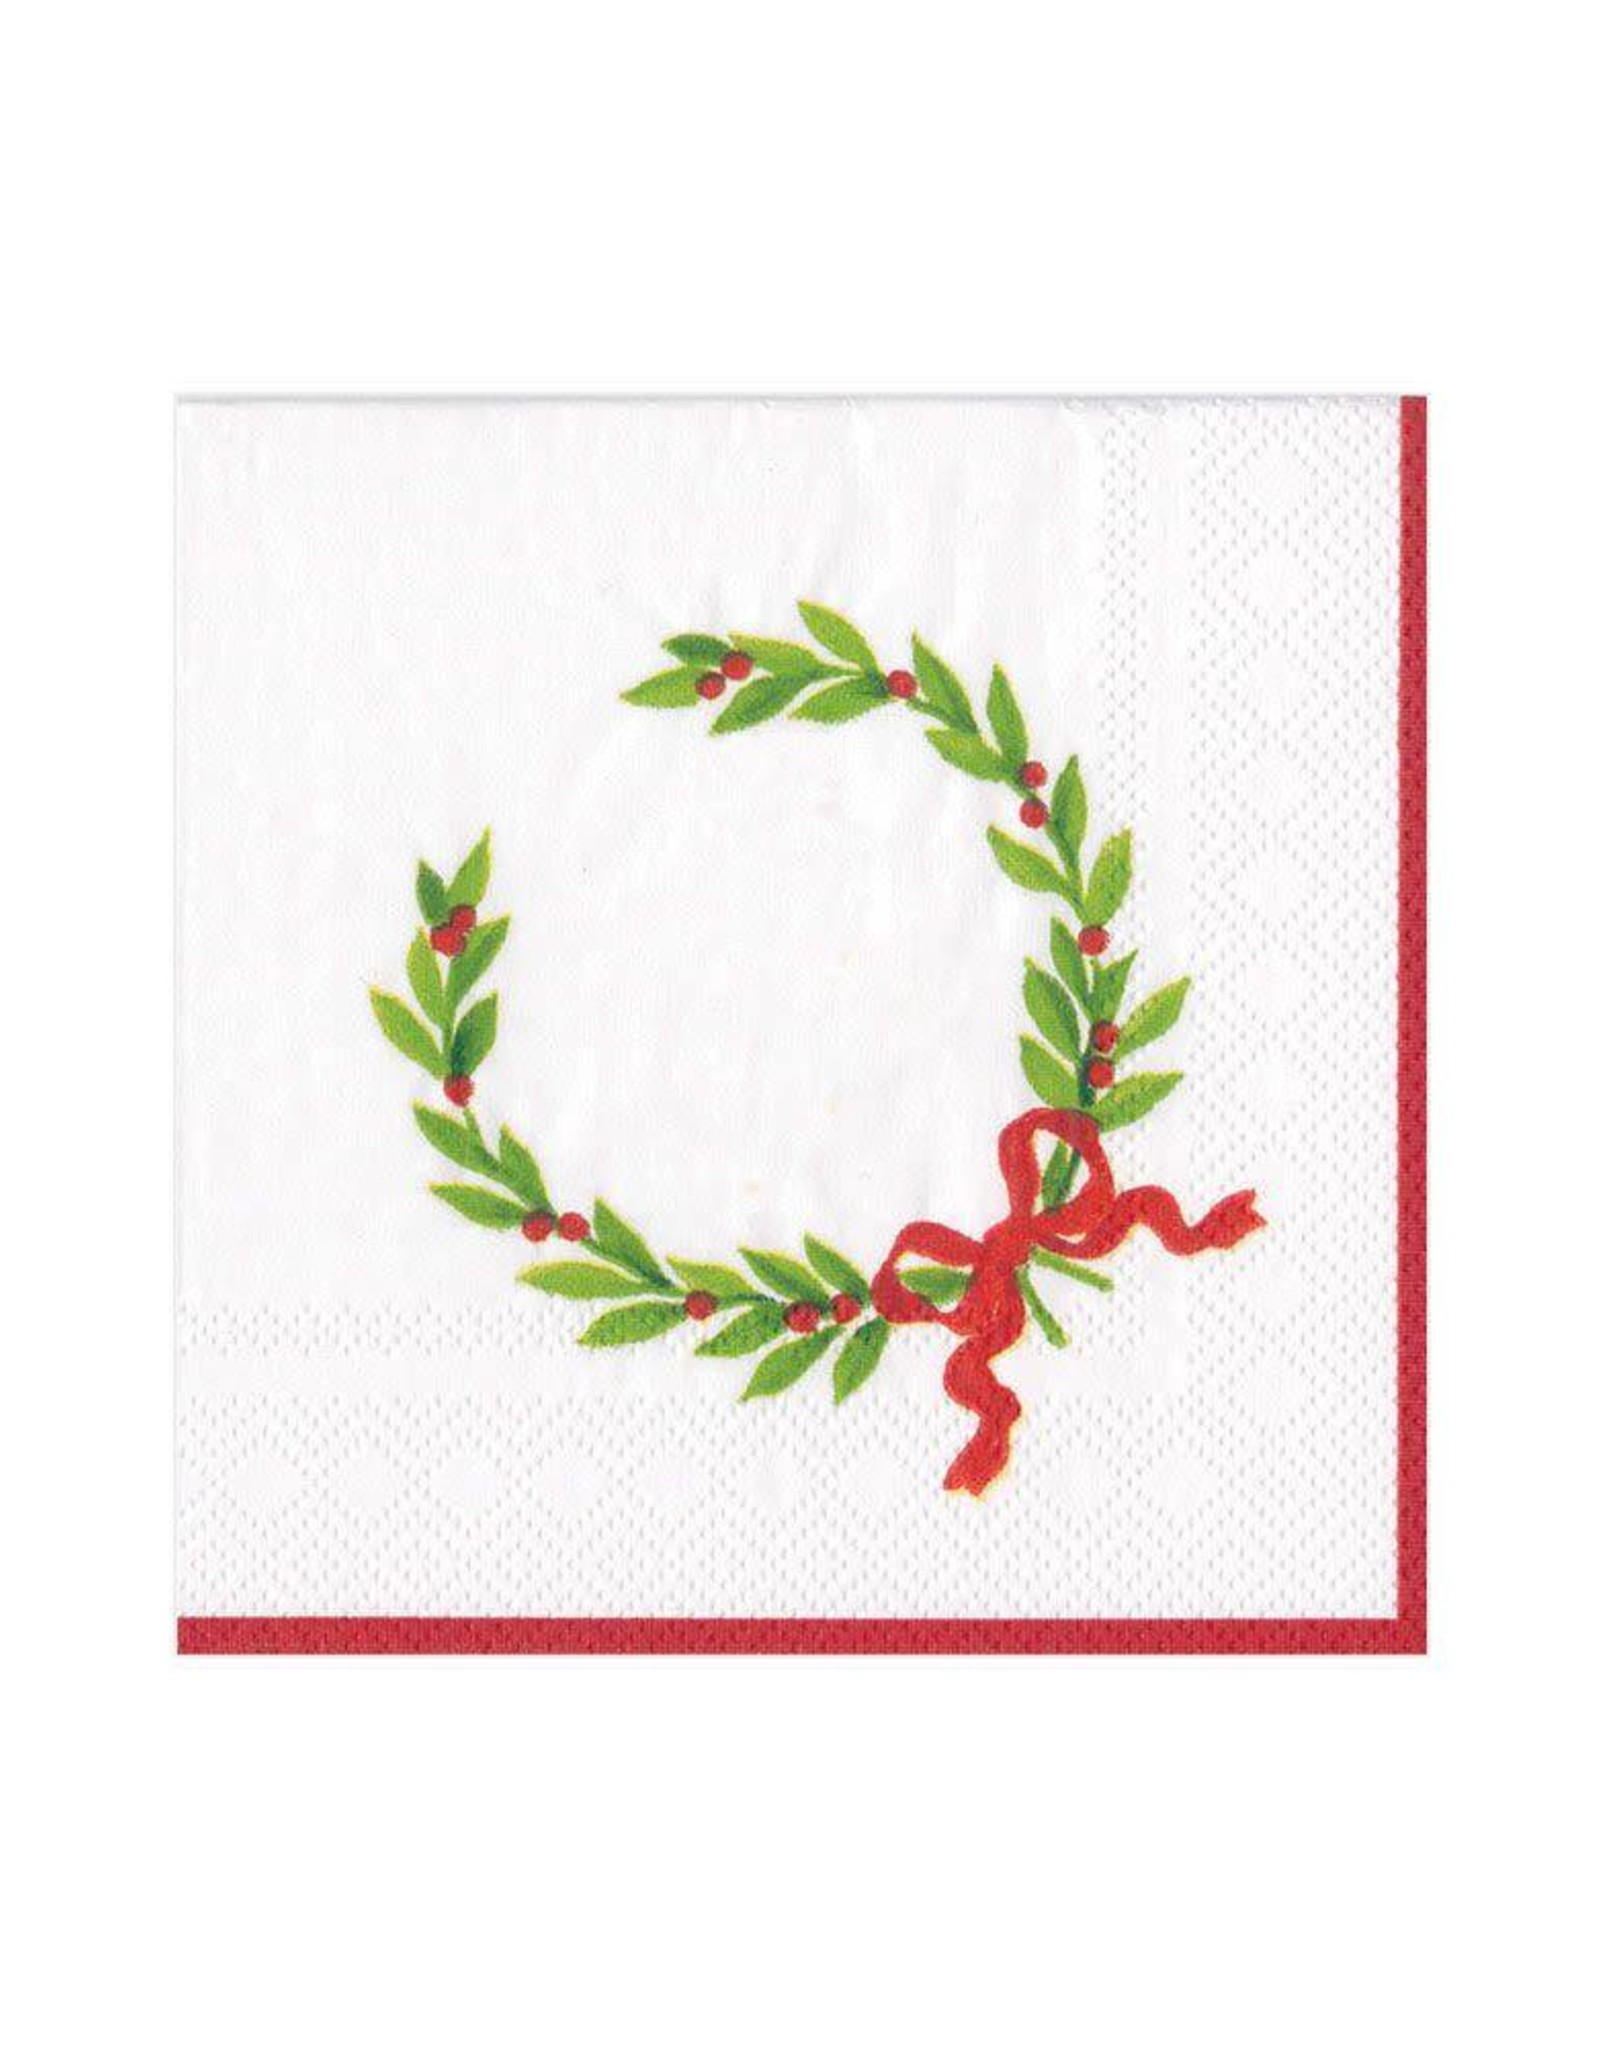 Christmas Laurel Wreath with Initial "D" Beverage Napkin (20ct)